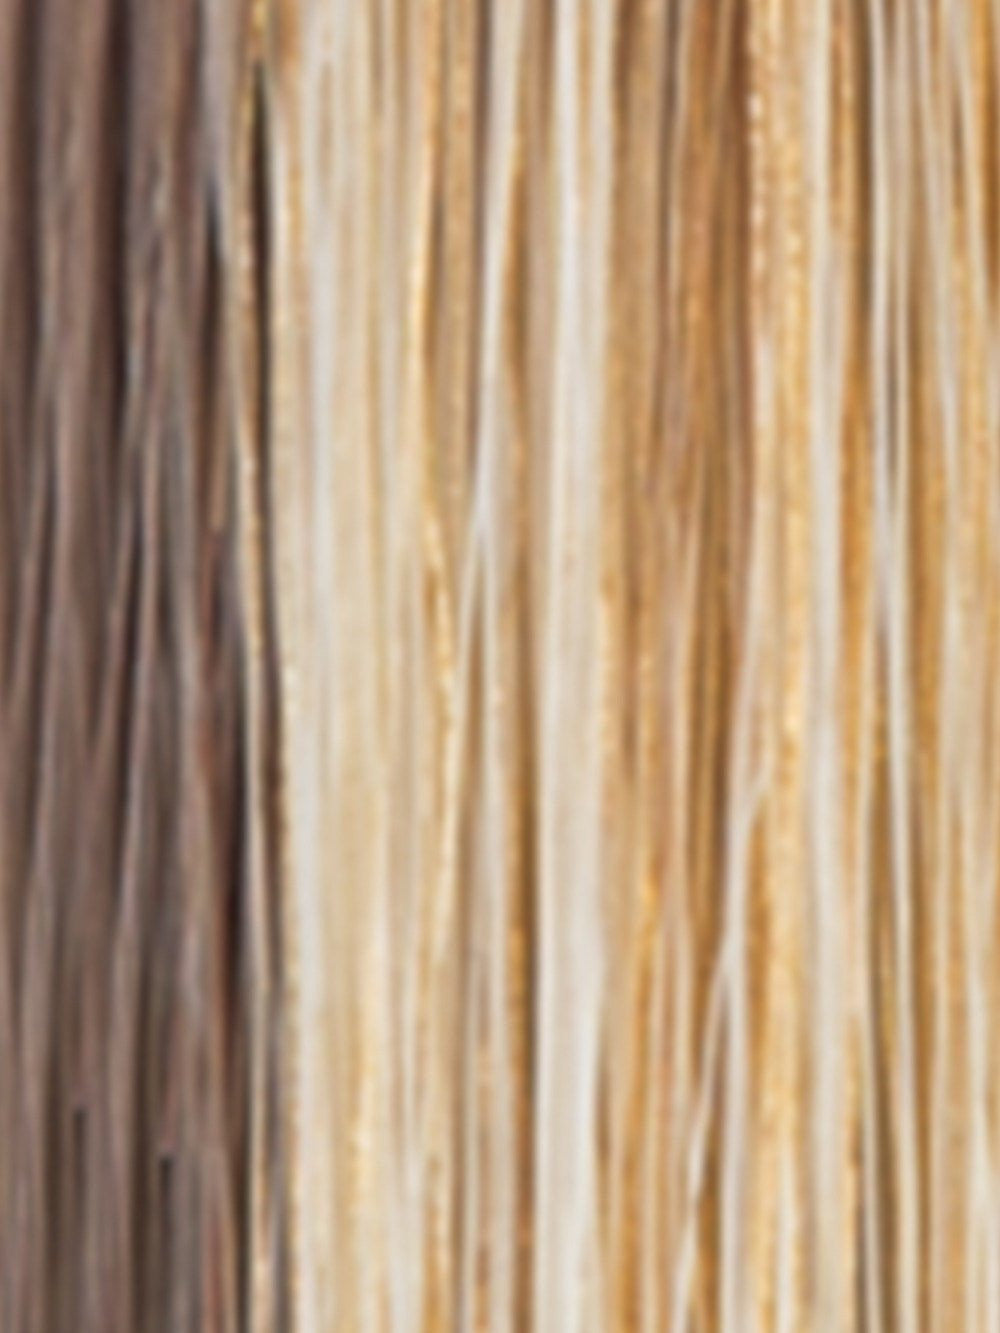 MOCHACCINO-LR | Longer Rooted Dark Brown with Light Brown Base and Strawberry Blonde Highlights 